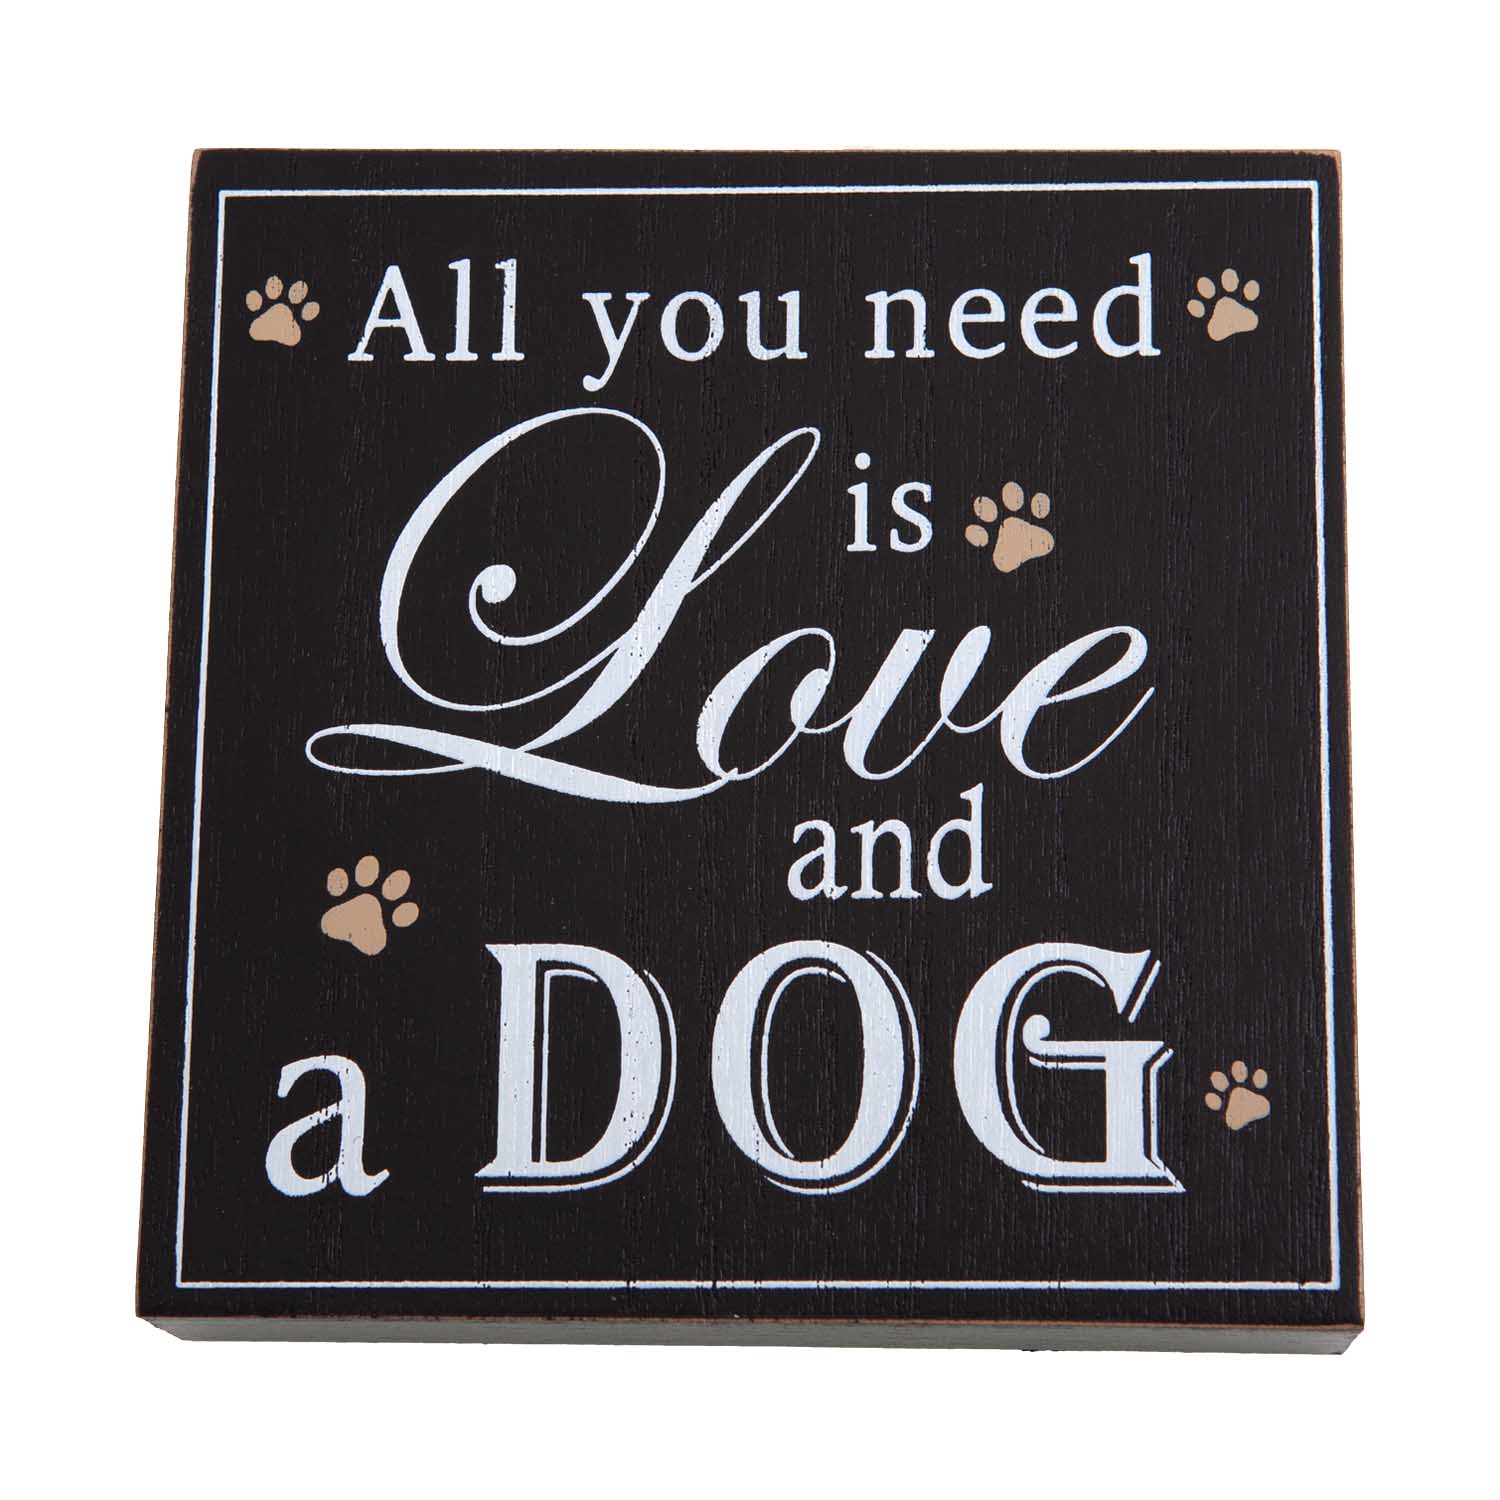 Dog Lover Gifts available at Dog Krazy Gifts – All You Need Is Love And A Dog Art Block Sign, Just Part Of Our Collection Of Signs Available At www.dogkrazygifts.co.uk